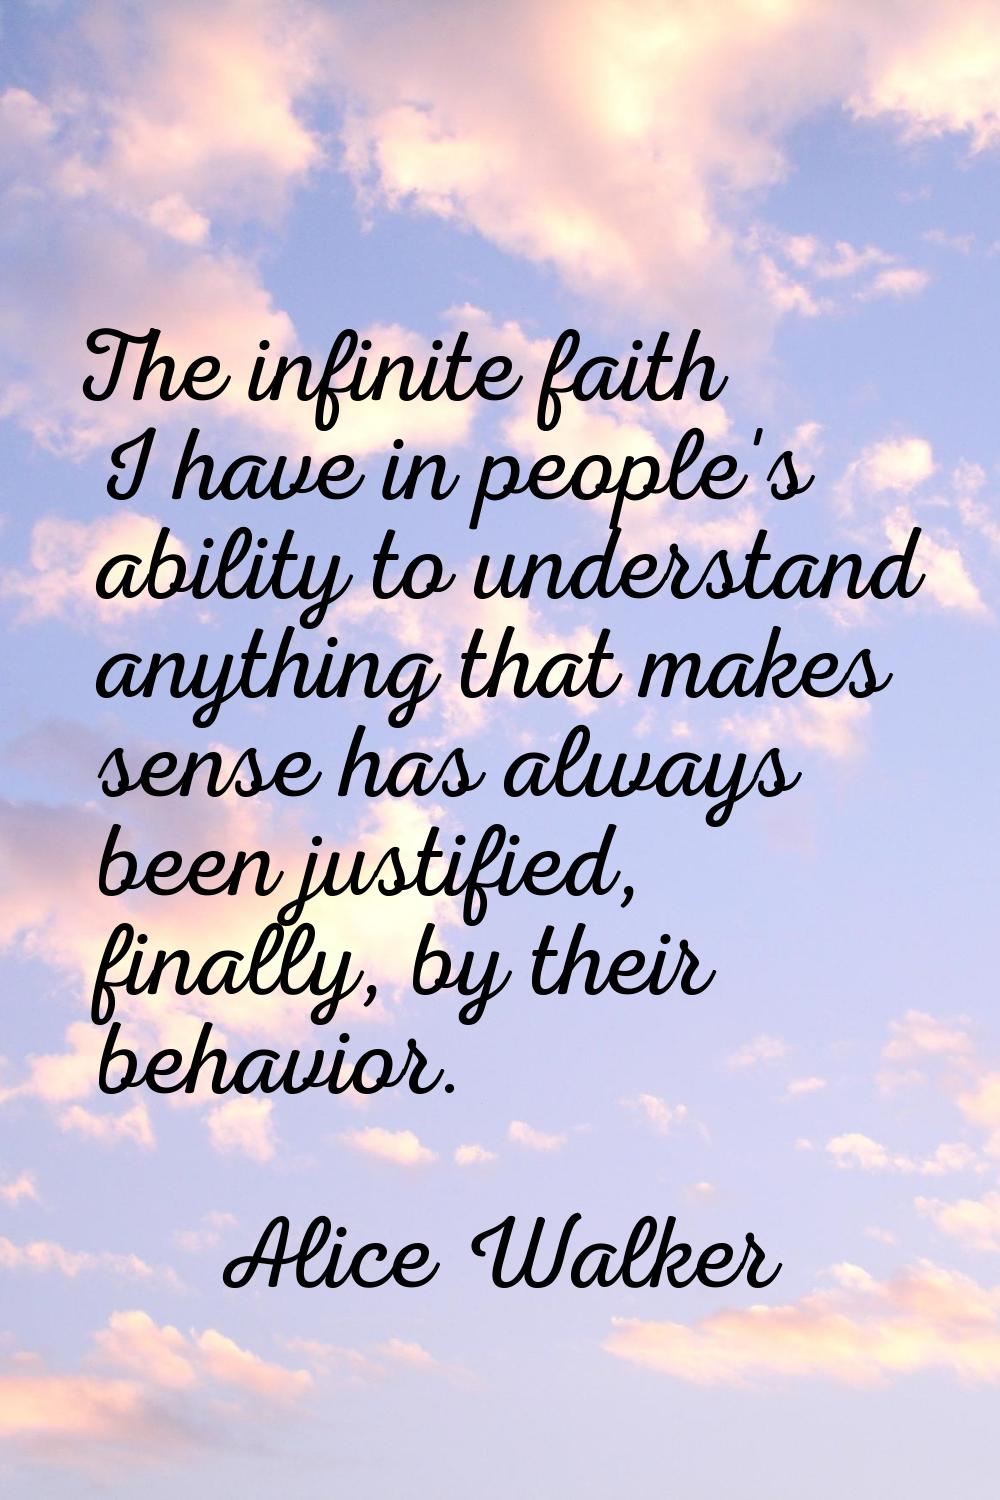 The infinite faith I have in people's ability to understand anything that makes sense has always be